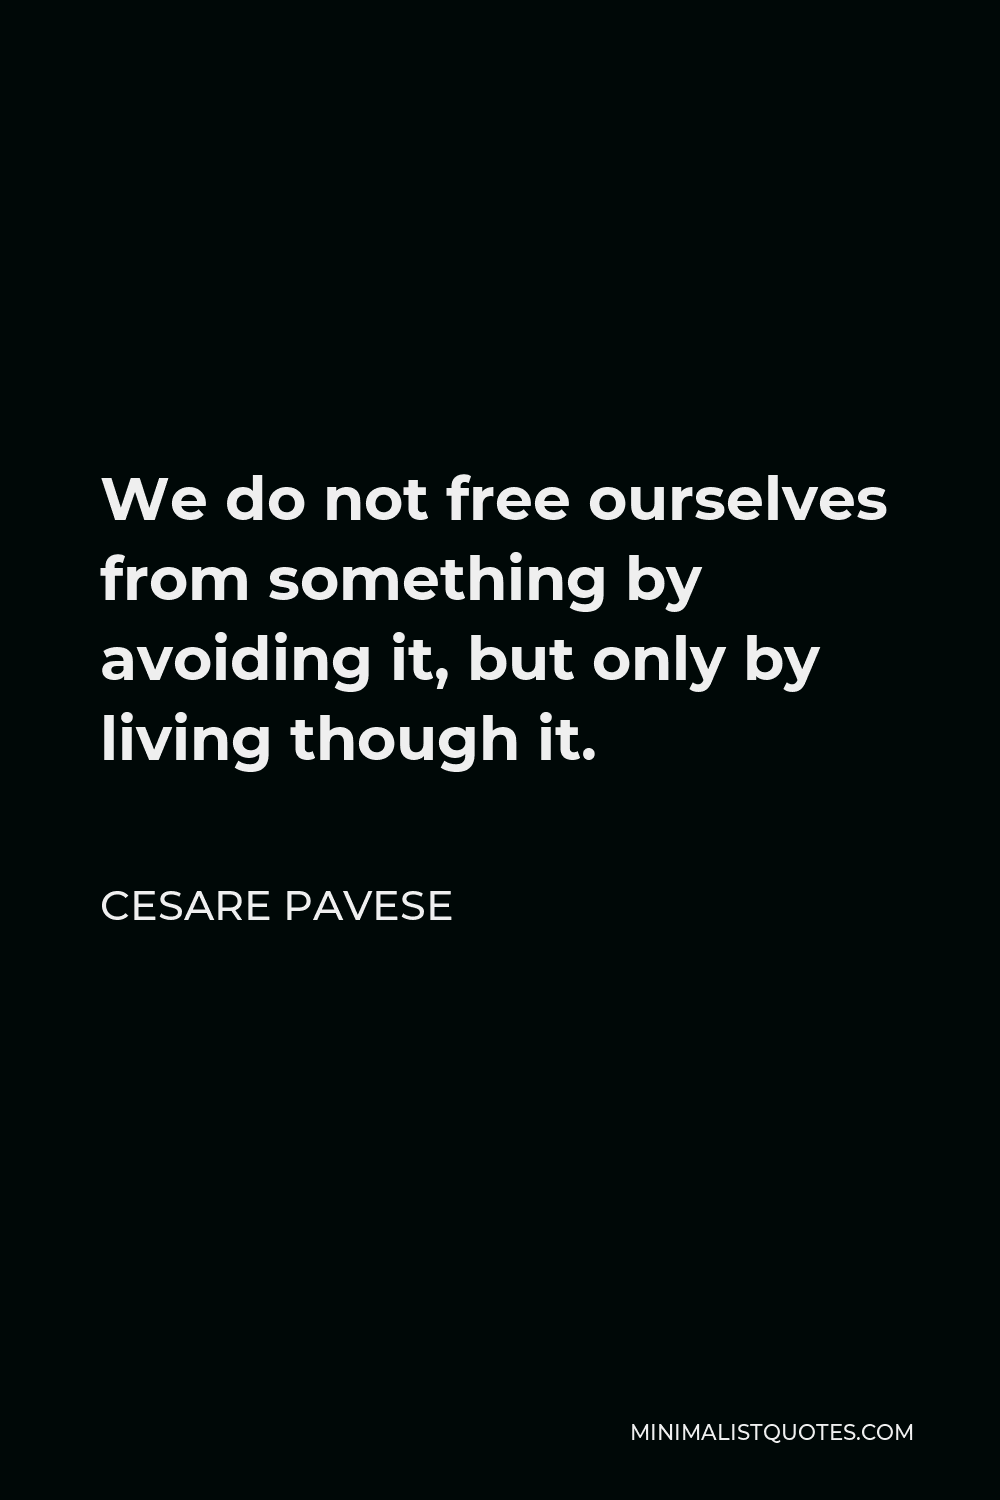 Cesare Pavese Quote - We do not free ourselves from something by avoiding it, but only by living though it.